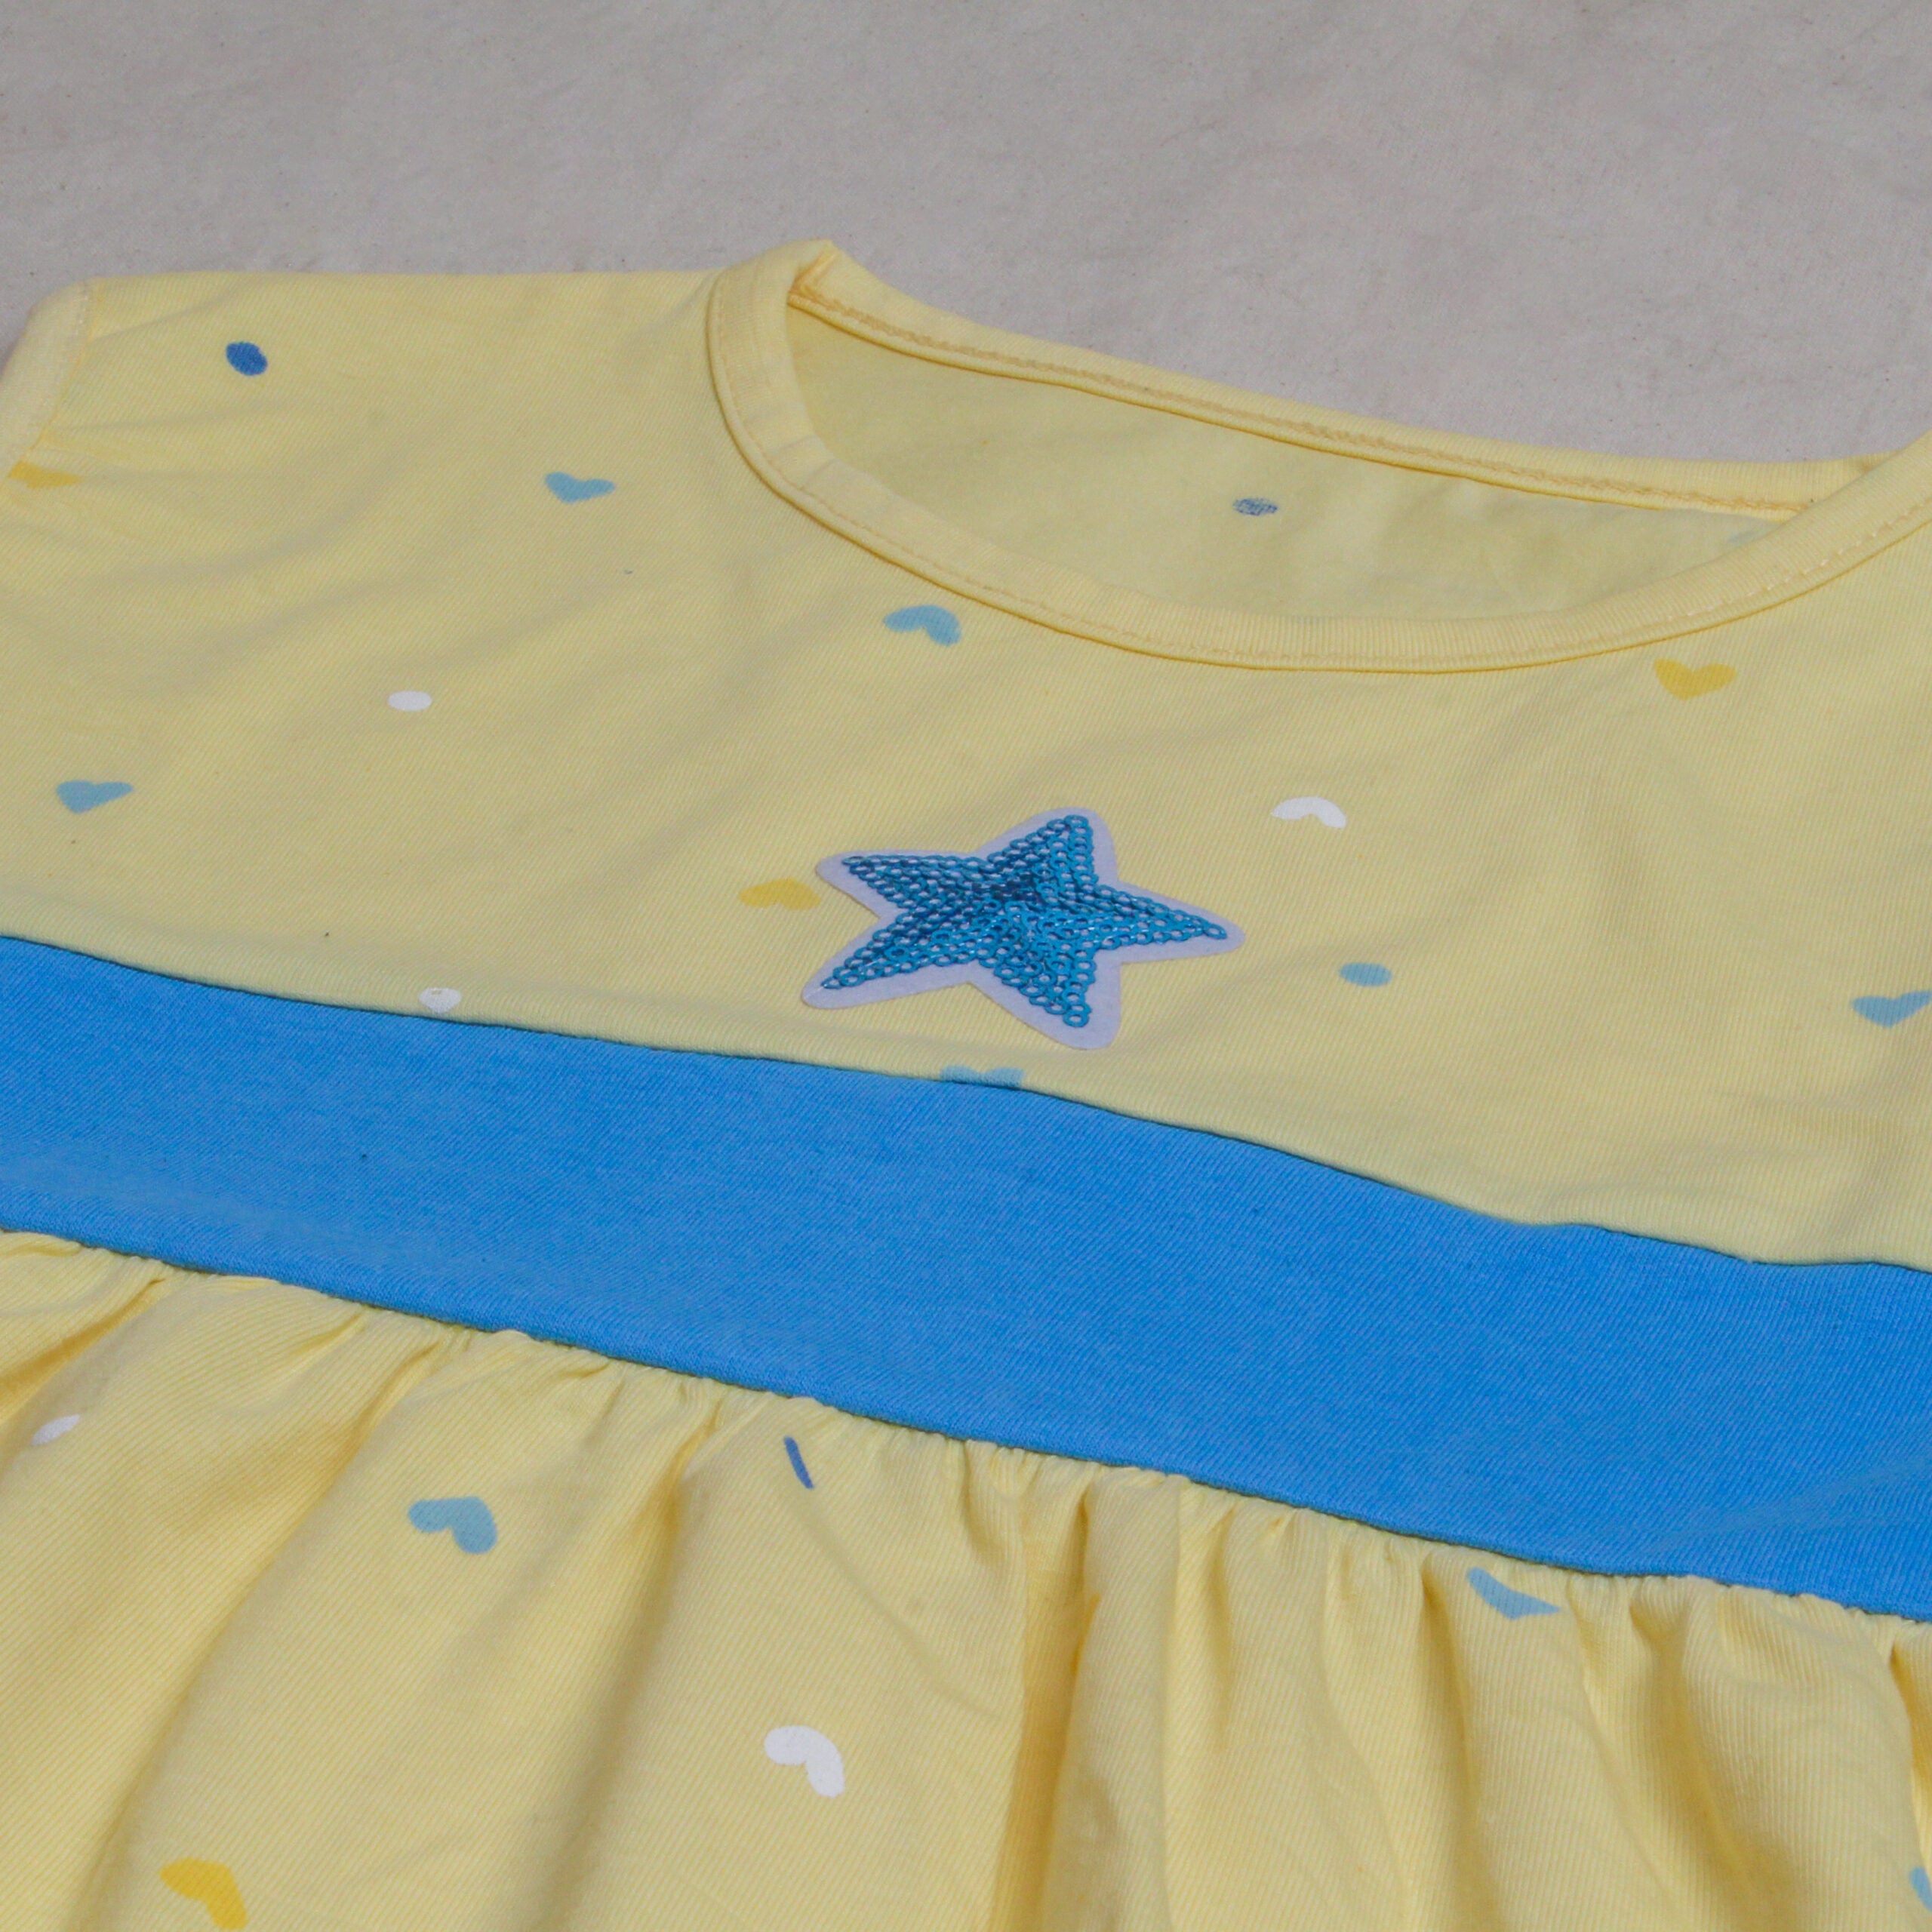 Girl's Yellow n Blue Star Frock